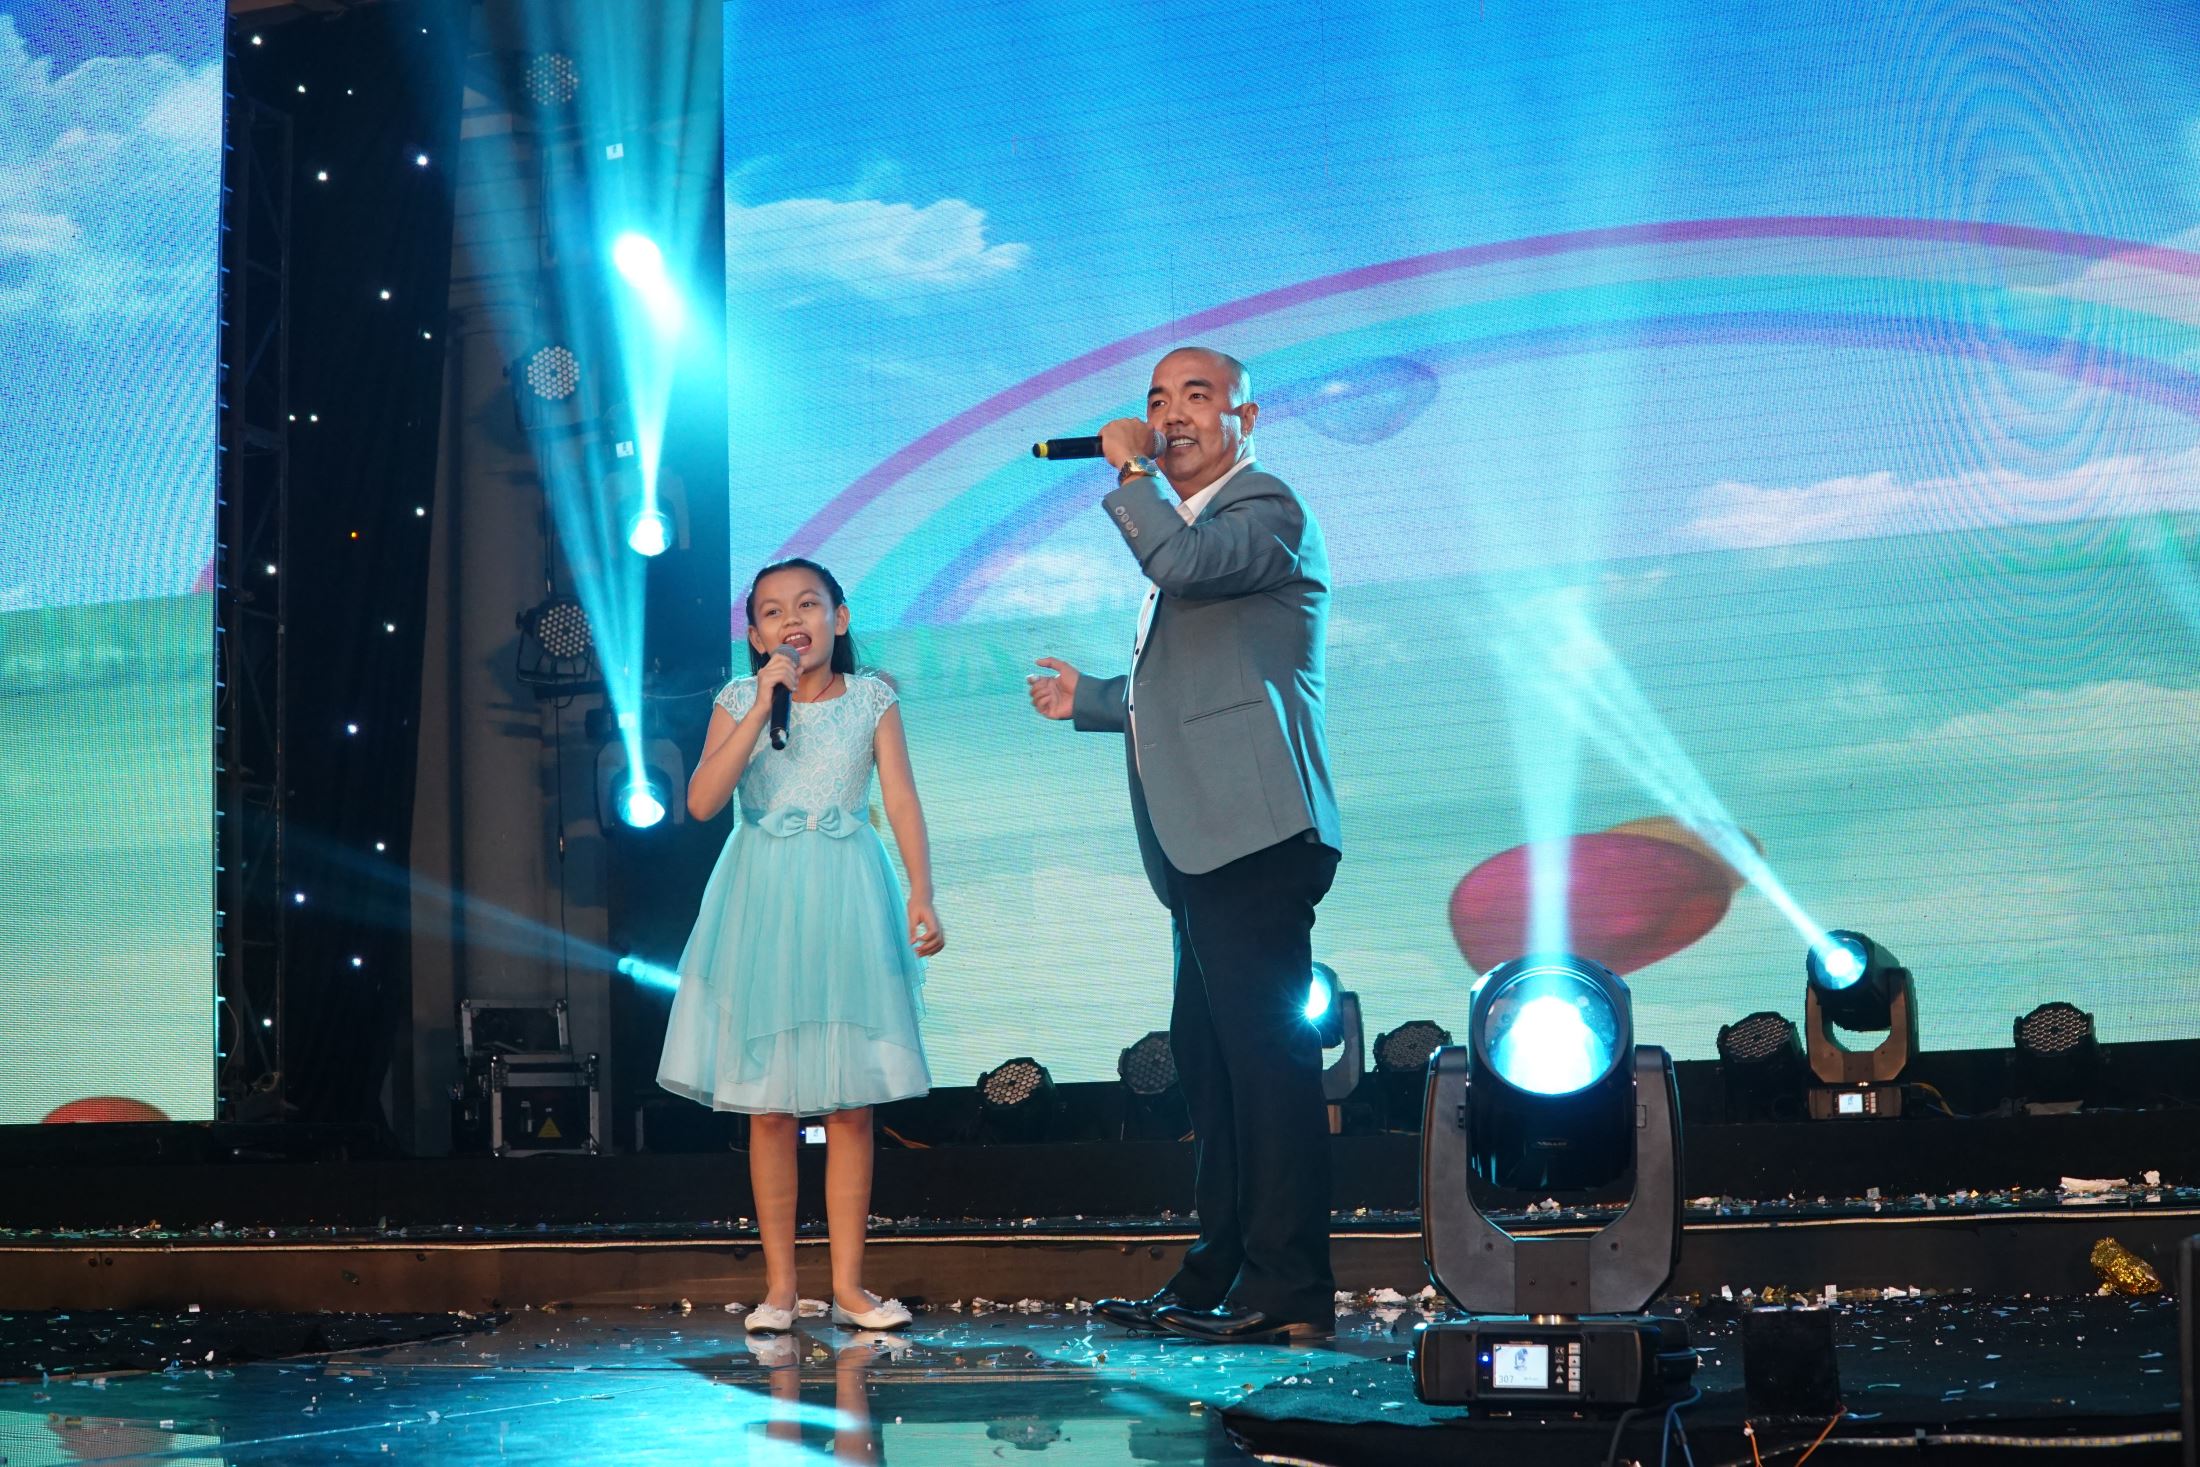 Actor Quoc Thuan and Bao Ngu performed the song “The Little Boy”.